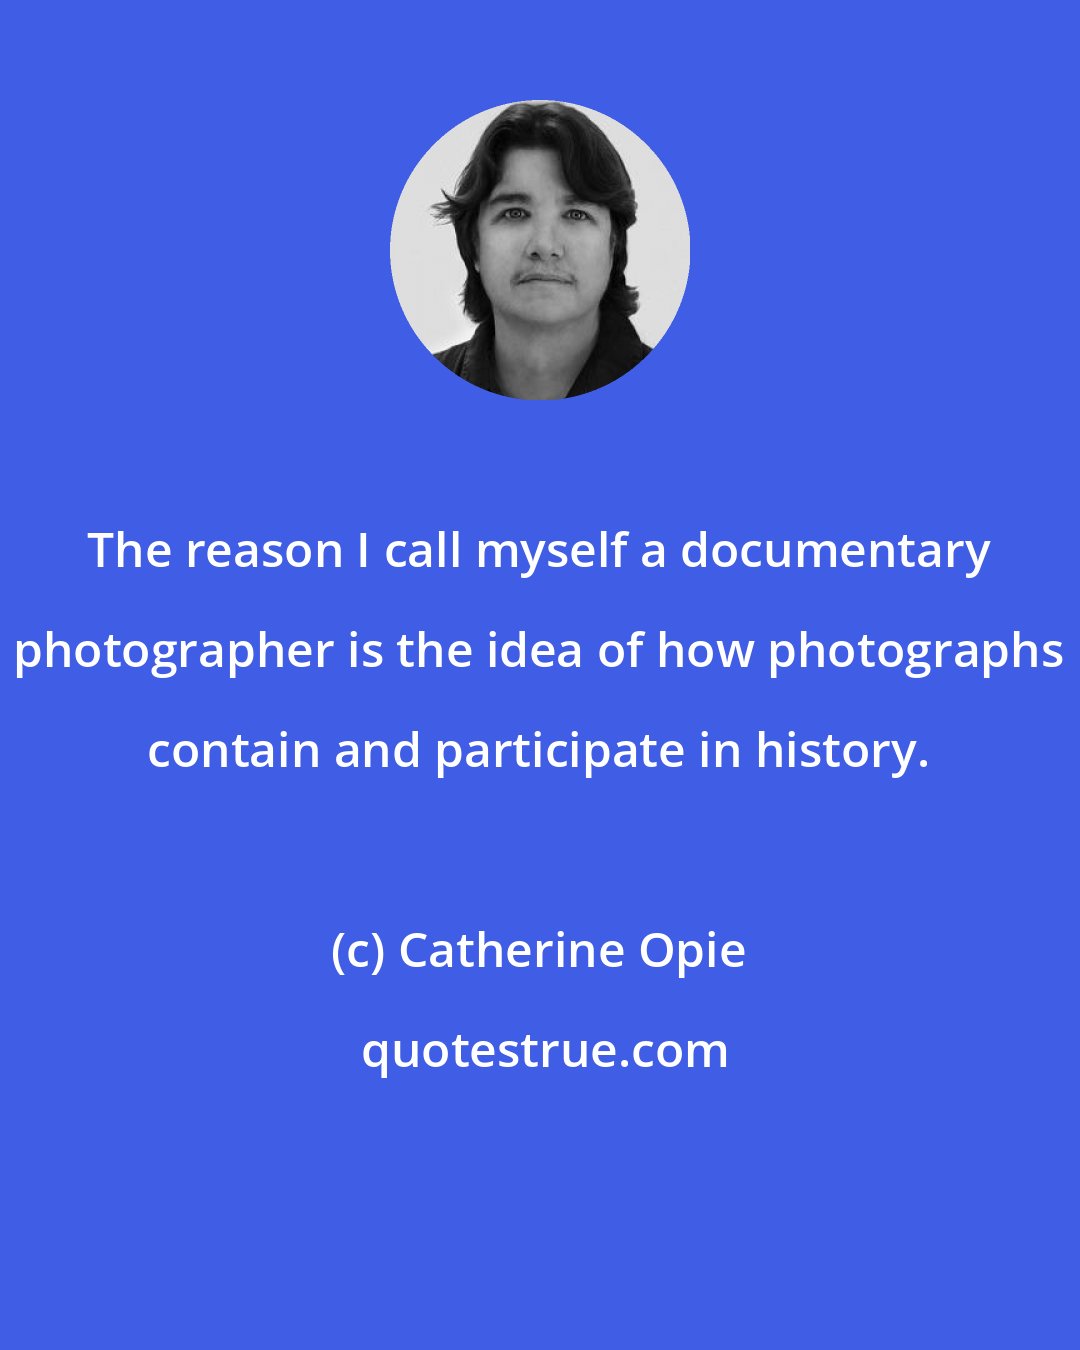 Catherine Opie: The reason I call myself a documentary photographer is the idea of how photographs contain and participate in history.